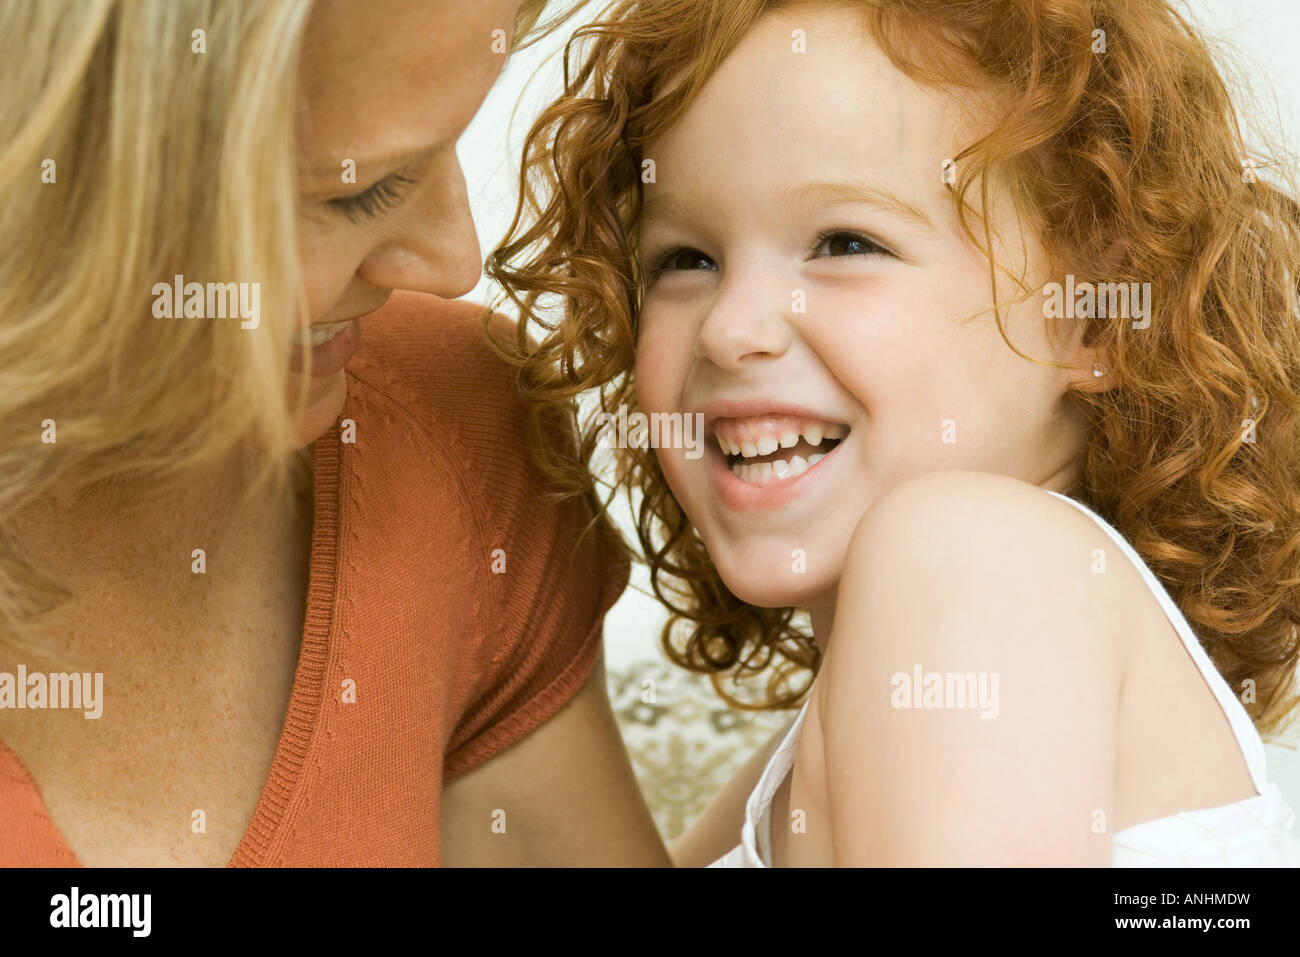 Mother and daughter laughing together, close-up Stock Photo